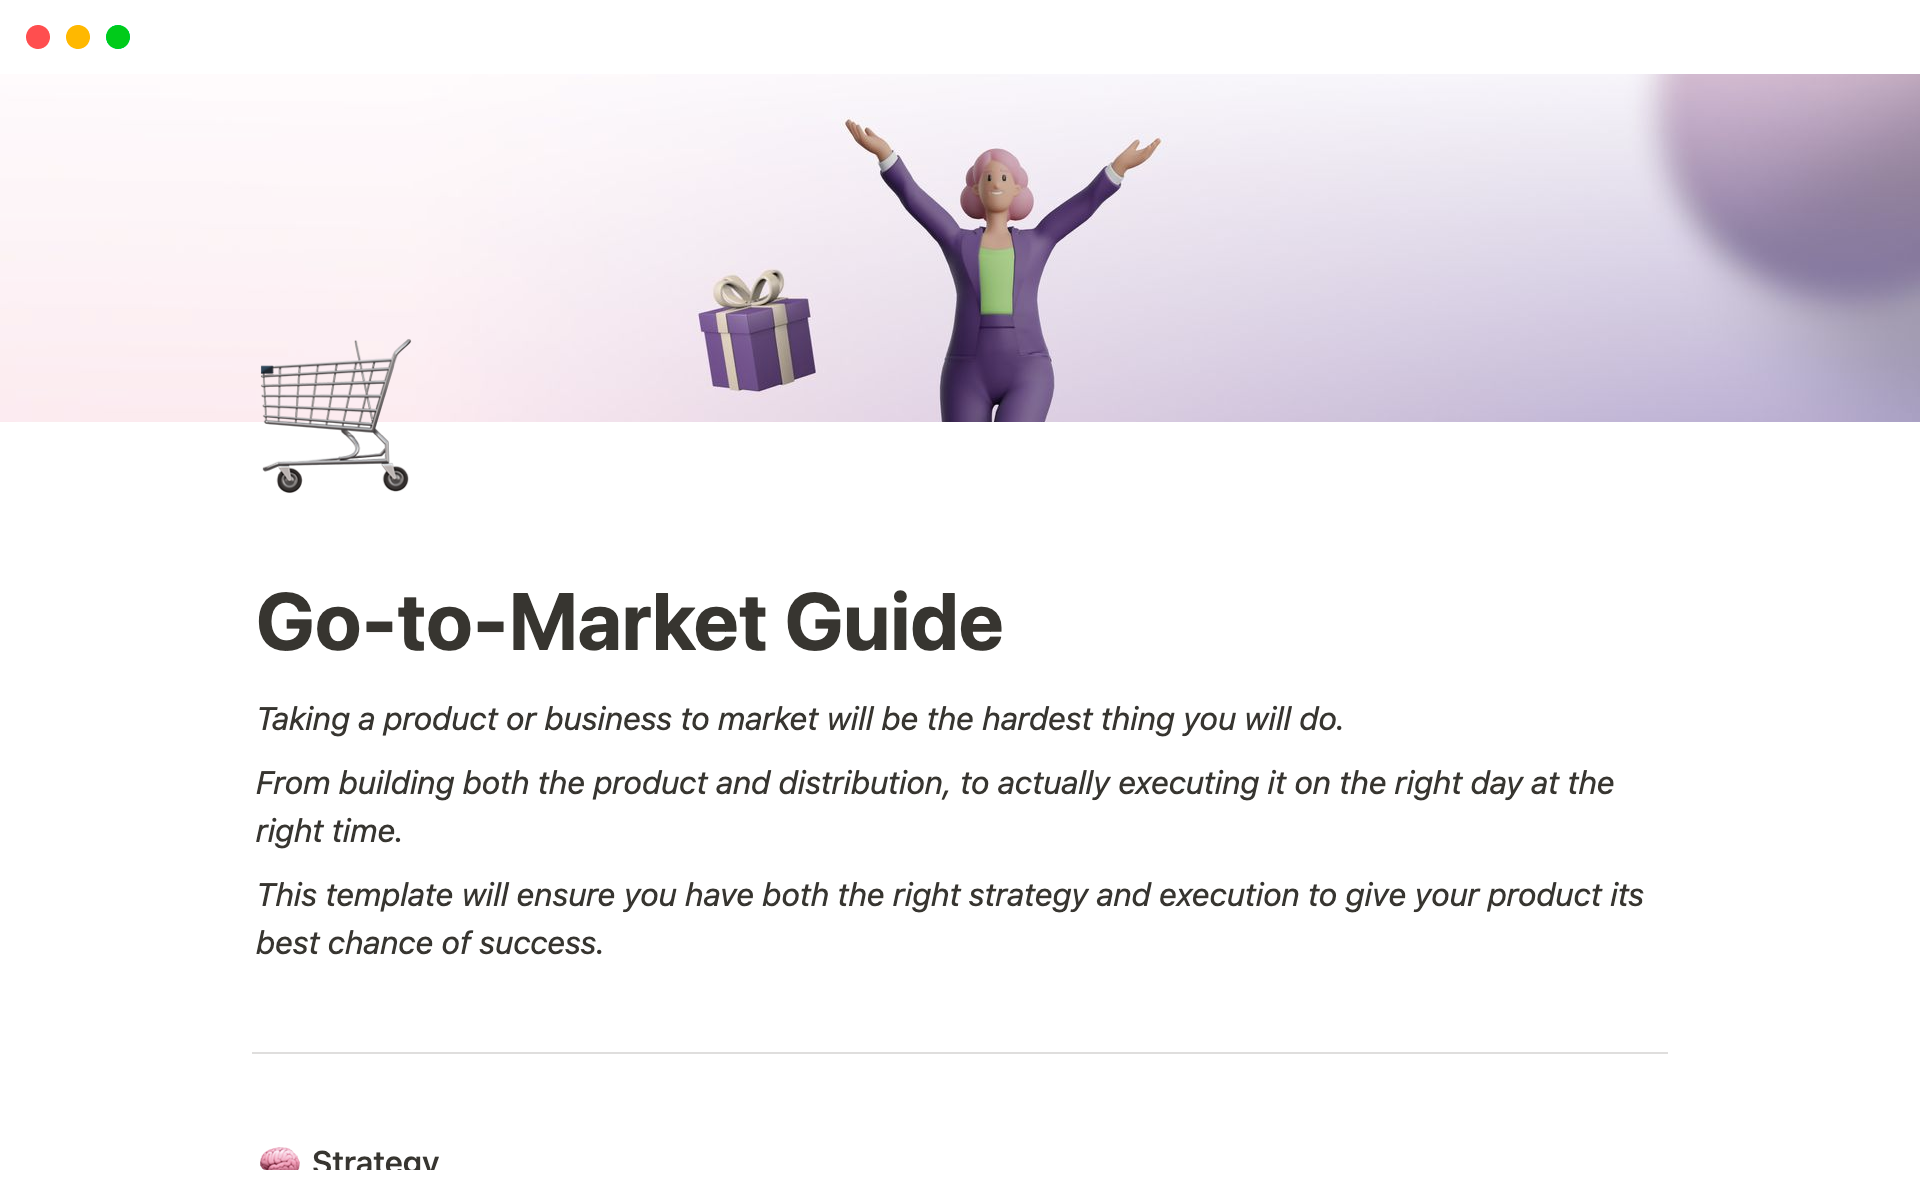 This template will ensure you have both the right strategy and execution to make taking a product or business to market a success.